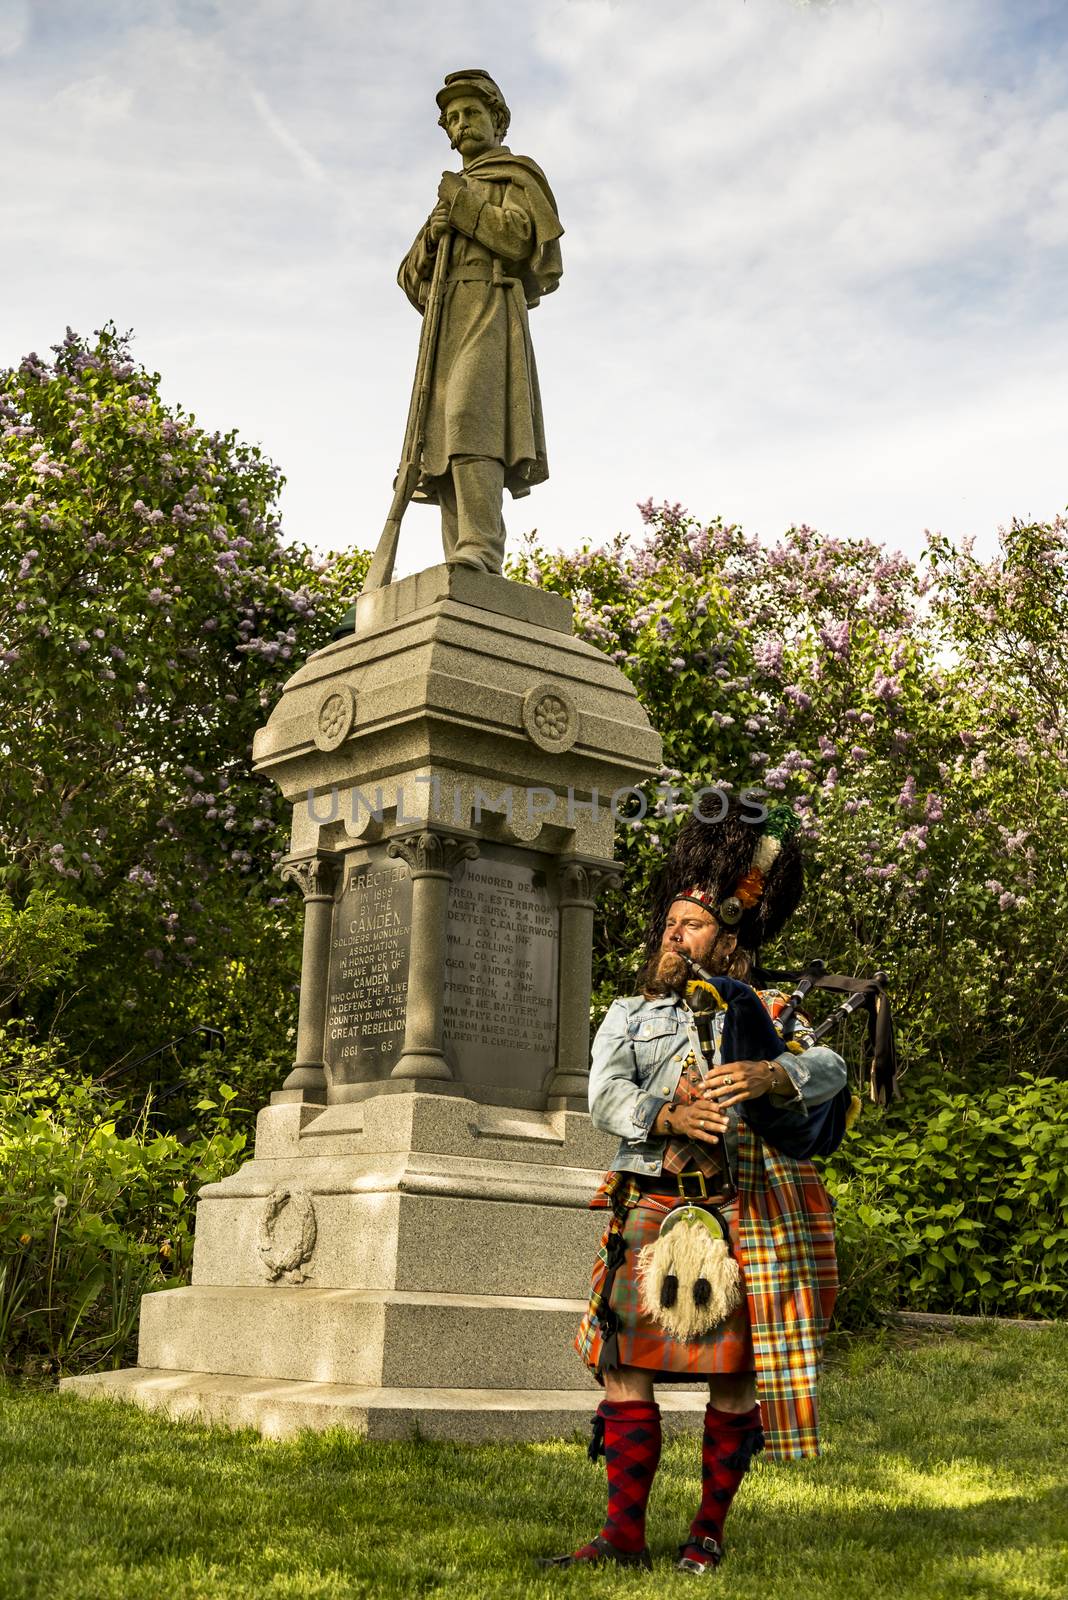 Scottish bagpiper dressed in traditional red and black tartan dress by edella